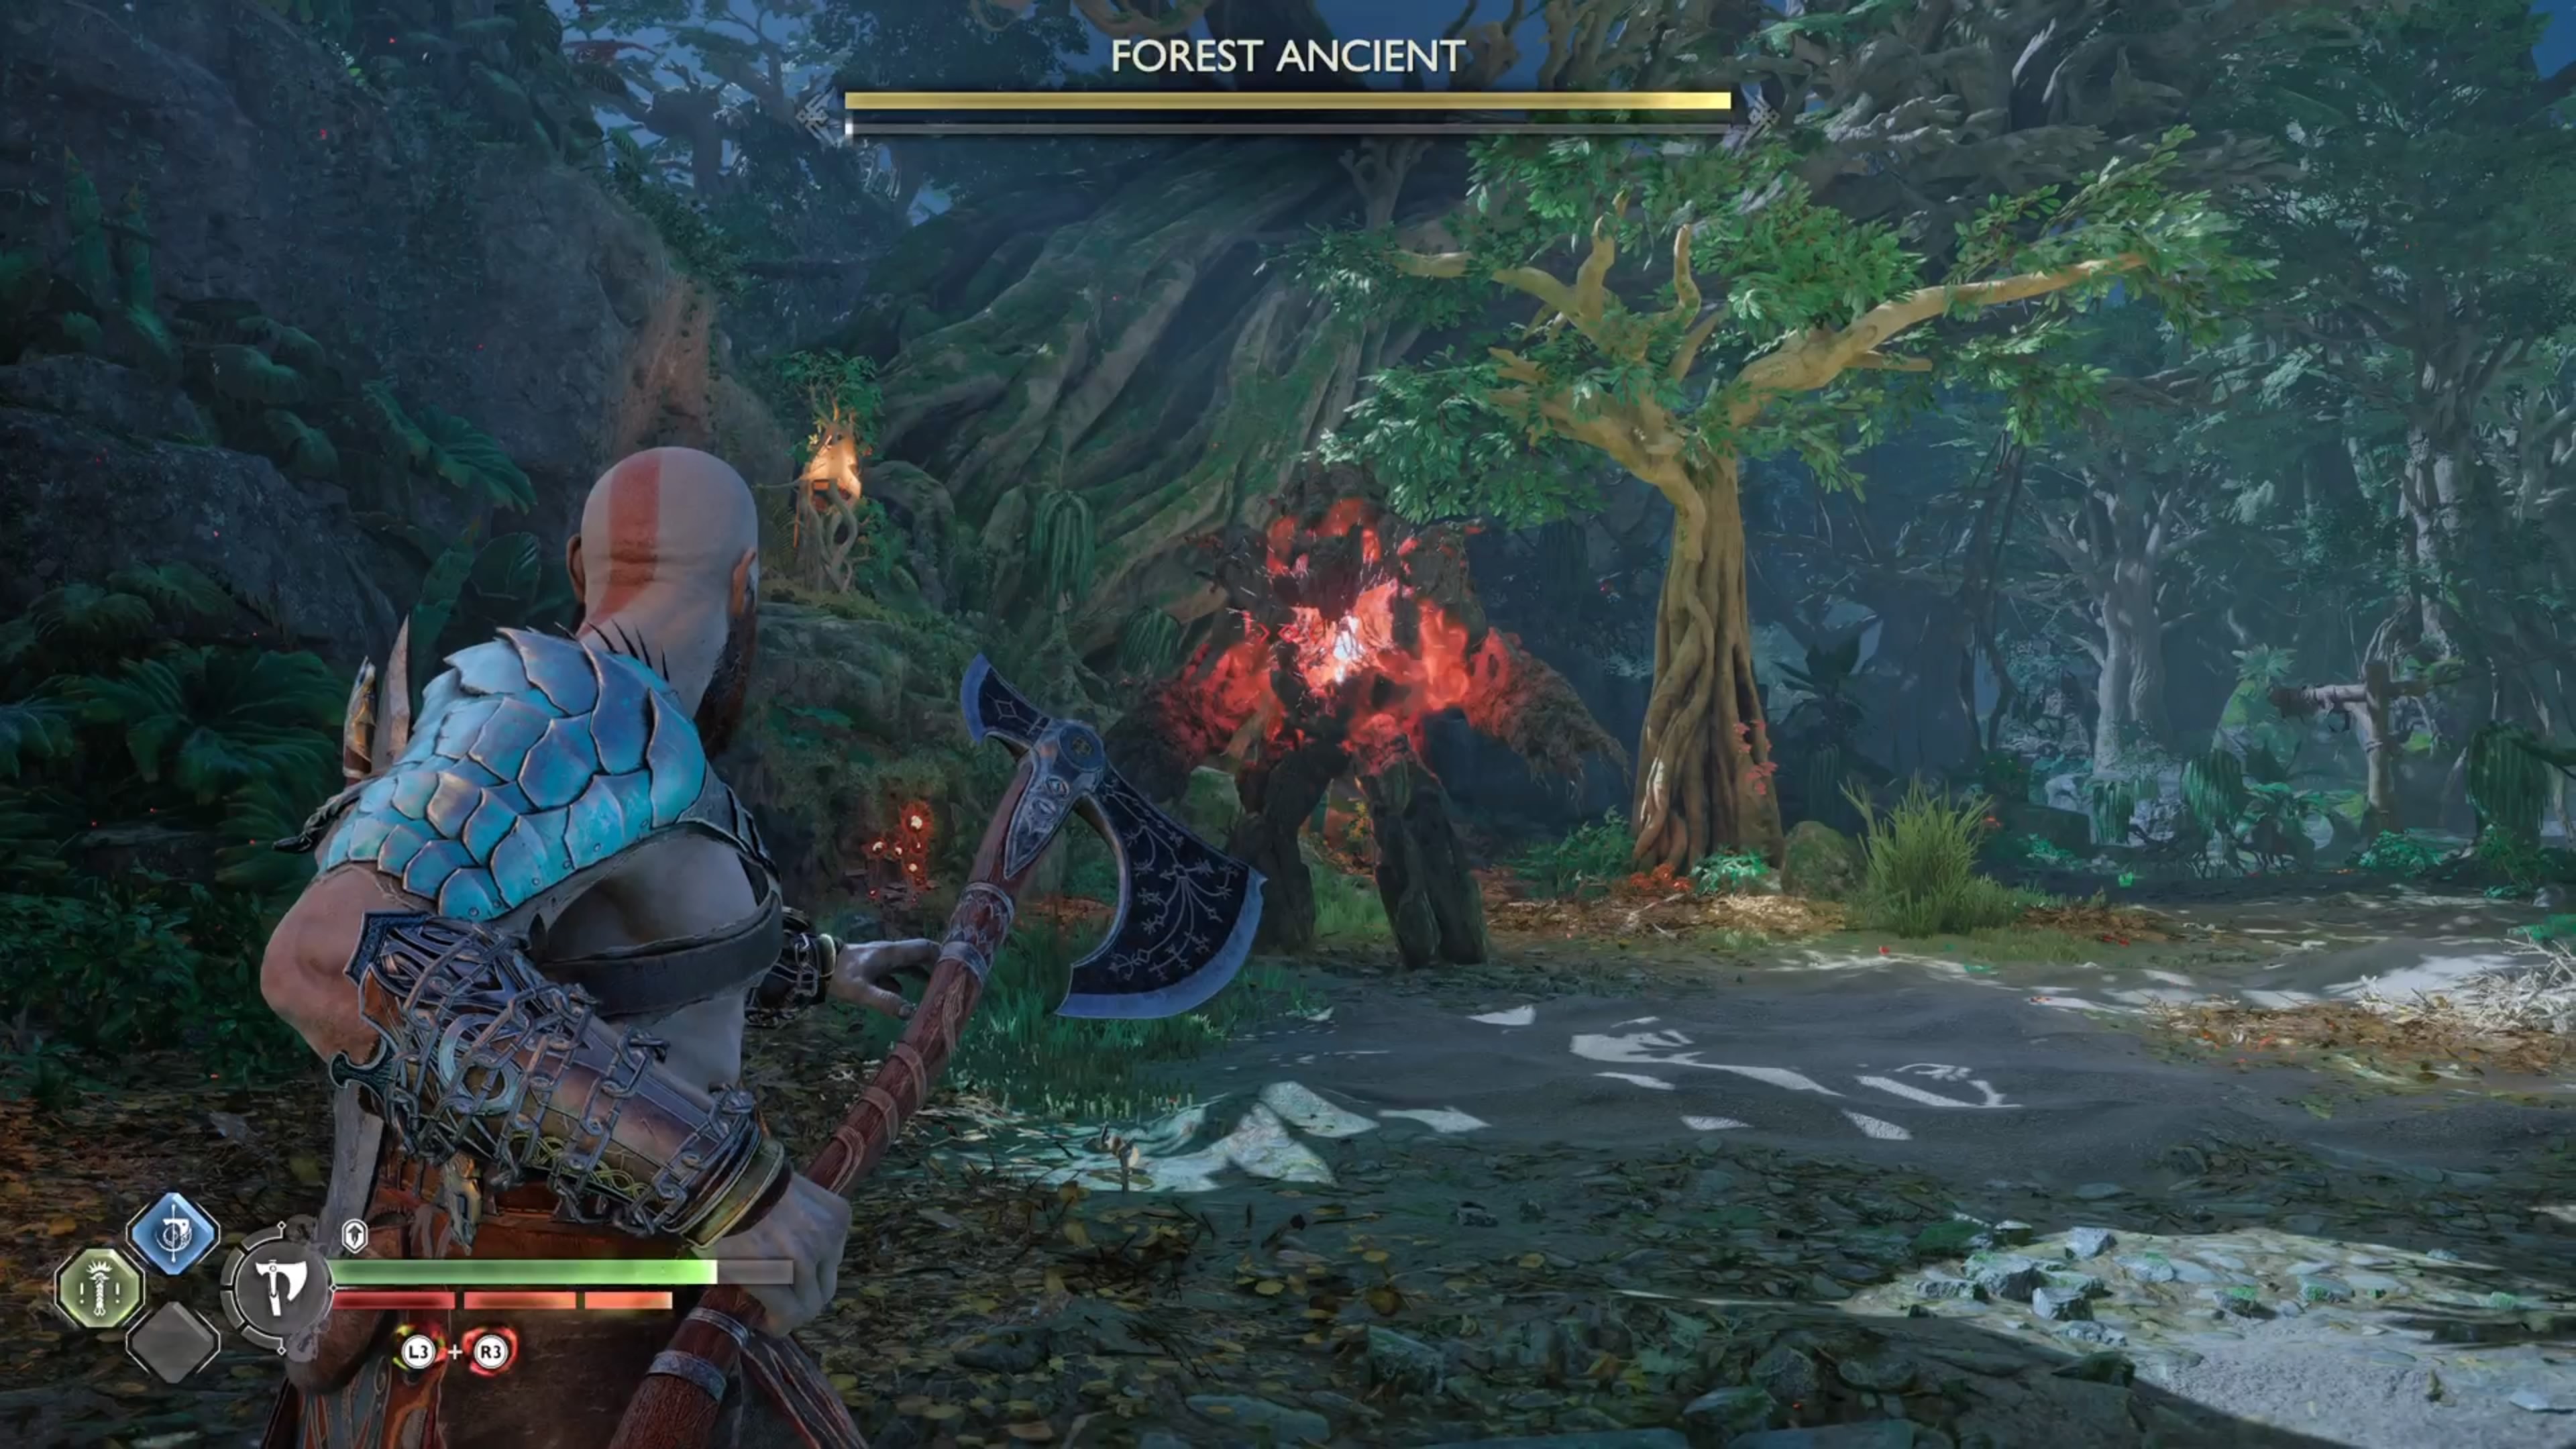 The Forest Ancient will just be walking around until you begin the fight